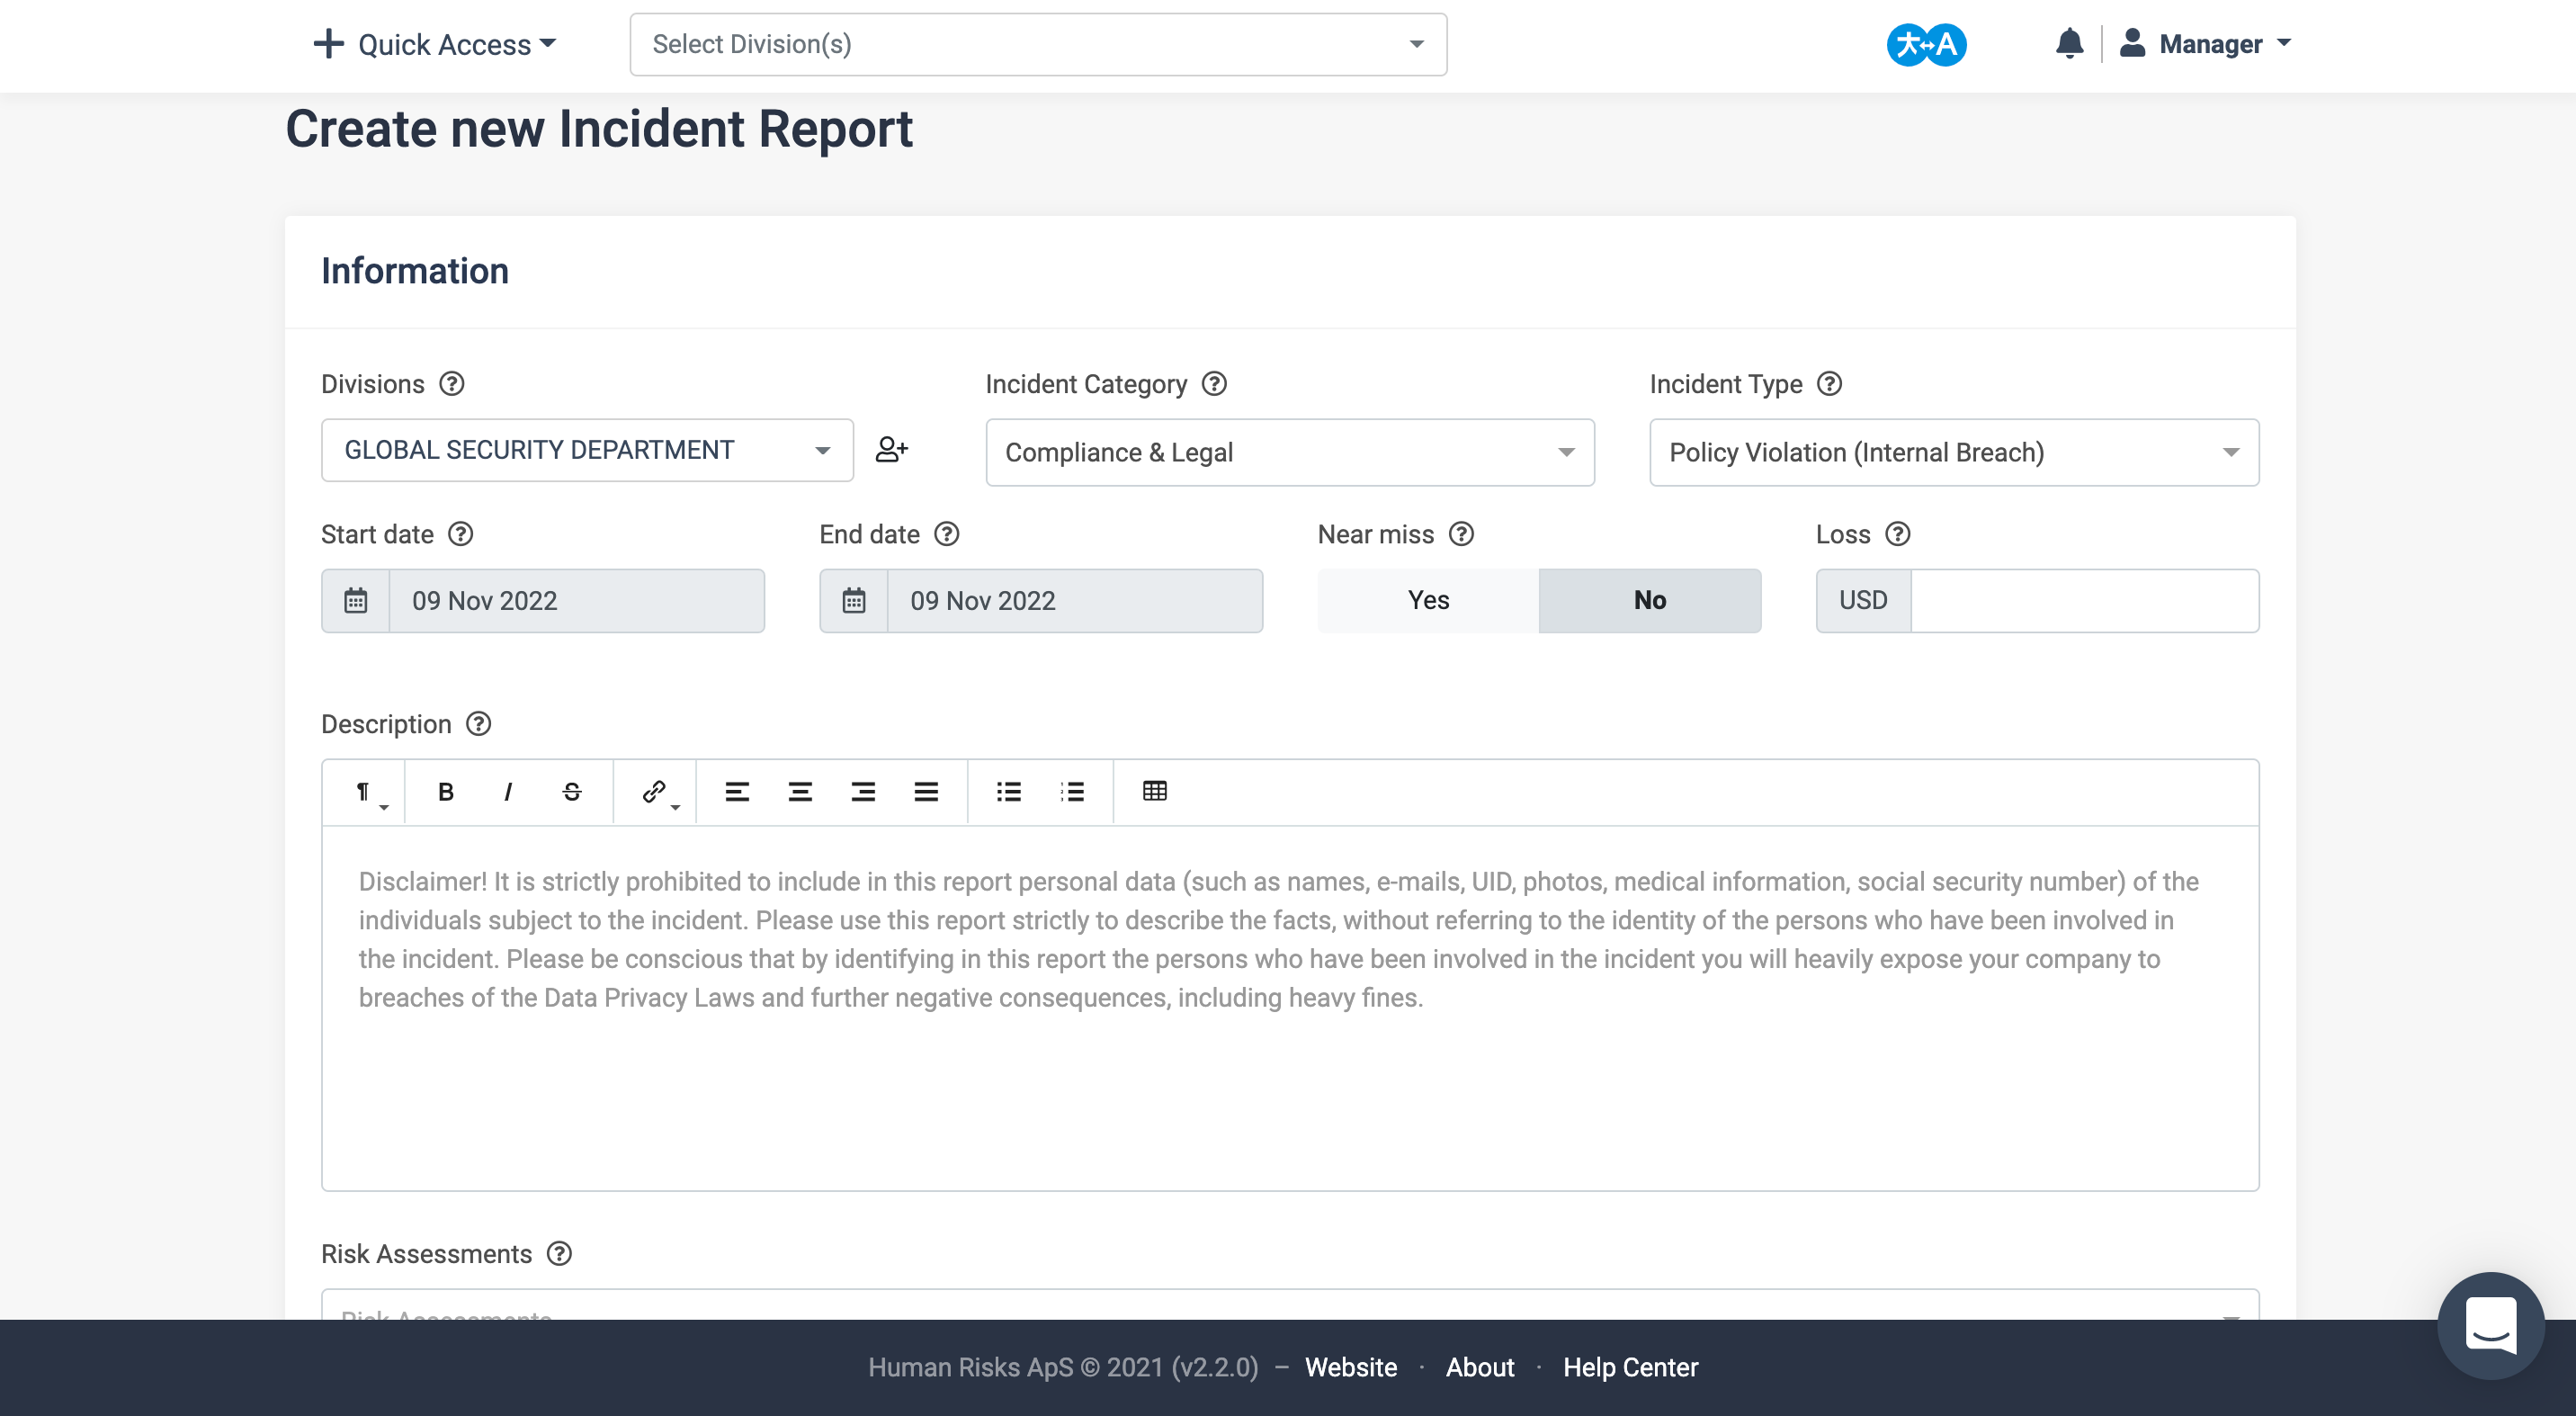 Incident Reports module - creating a new incident report